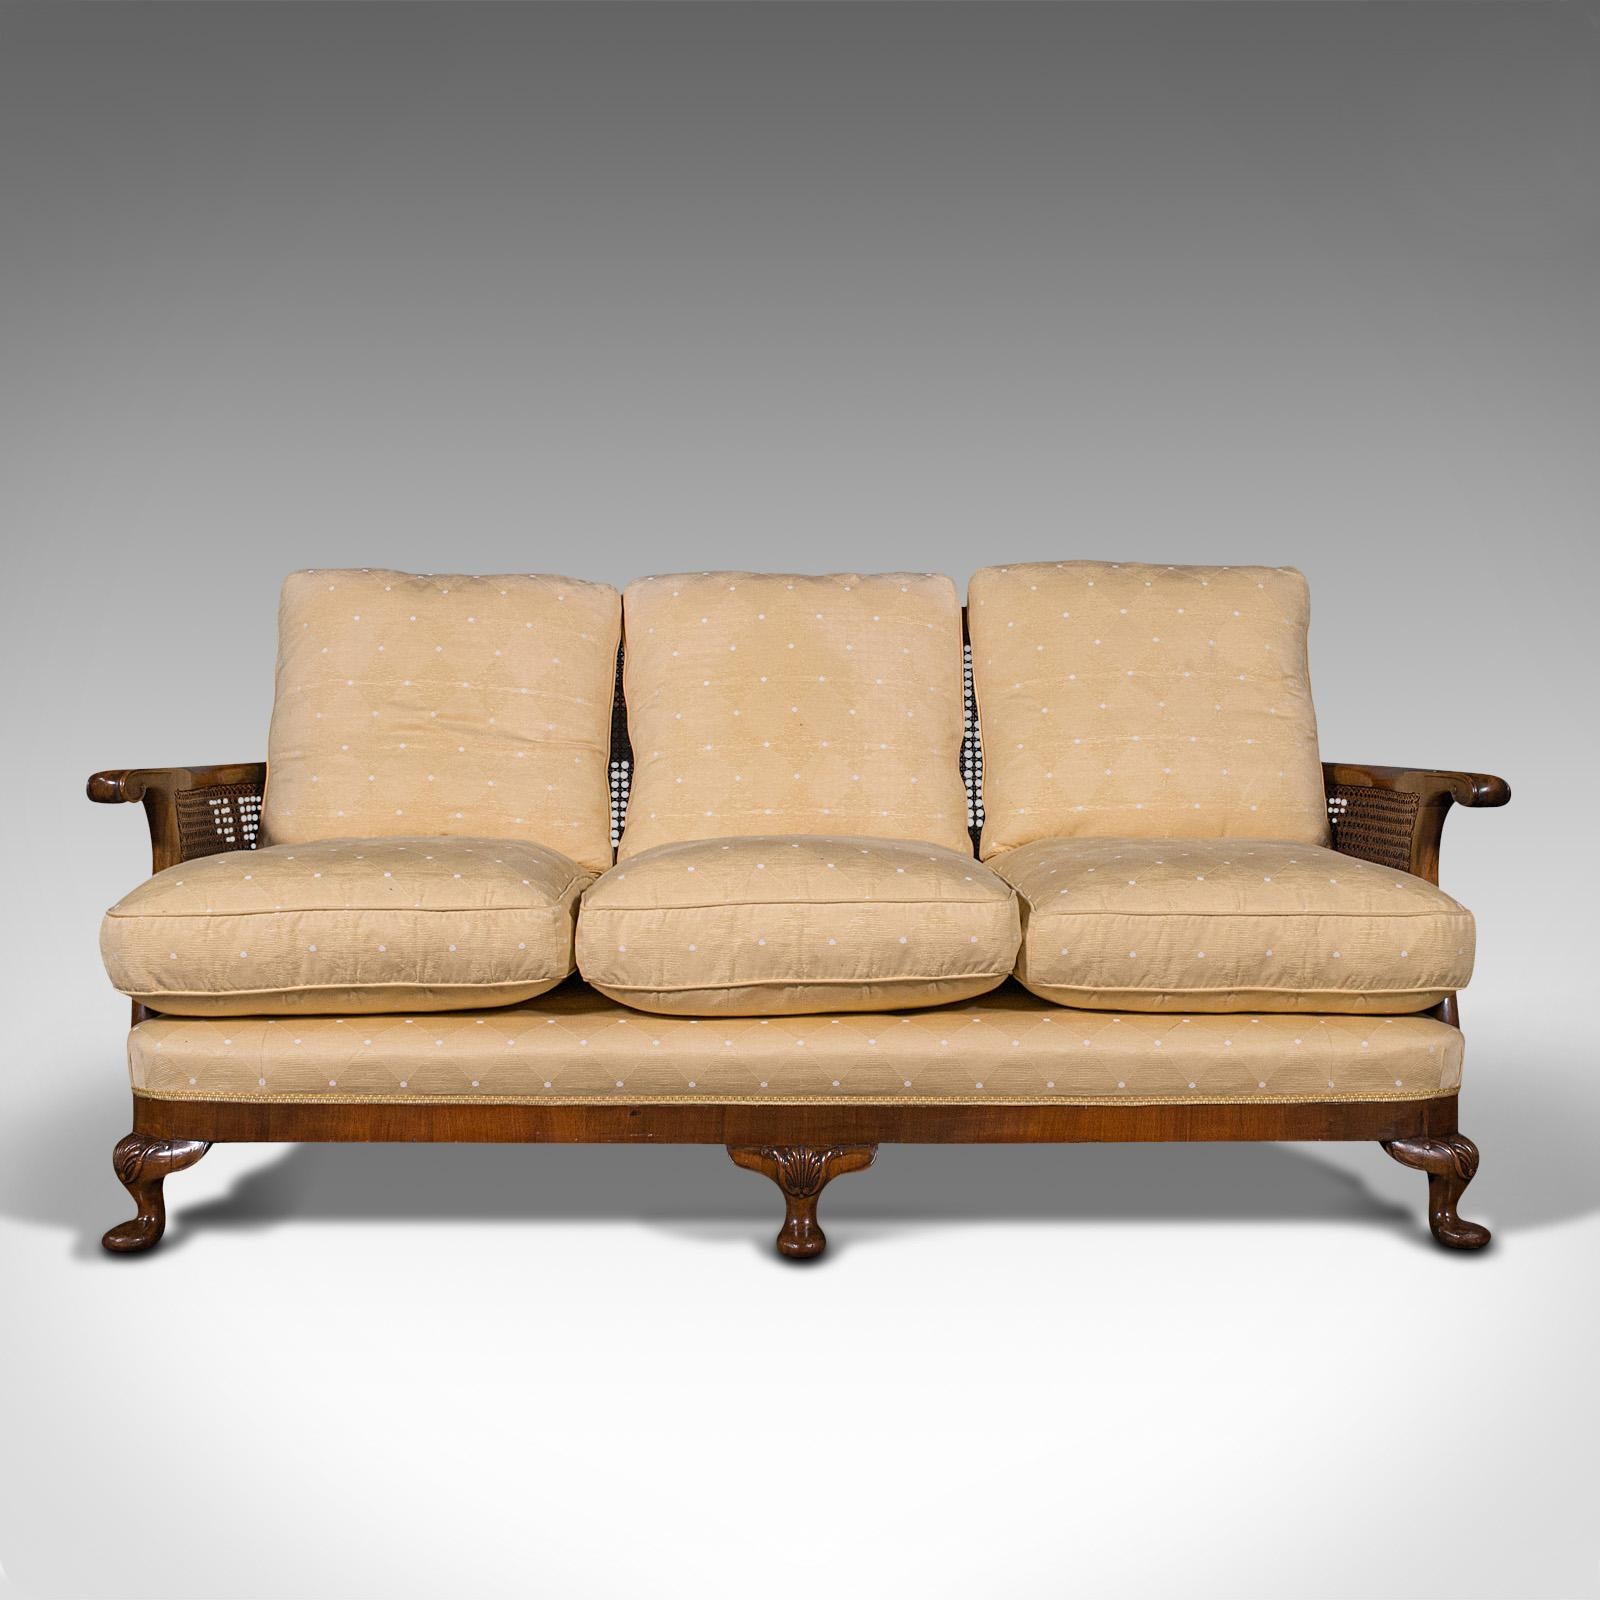 This is an antique bergere sofa. An English, walnut and cane three seat settee, dating to the Edwardian period, circa 1910.

Delightful reception room or conservatory sofa
Displays a desirable aged patina and in good order
Walnut frame shows